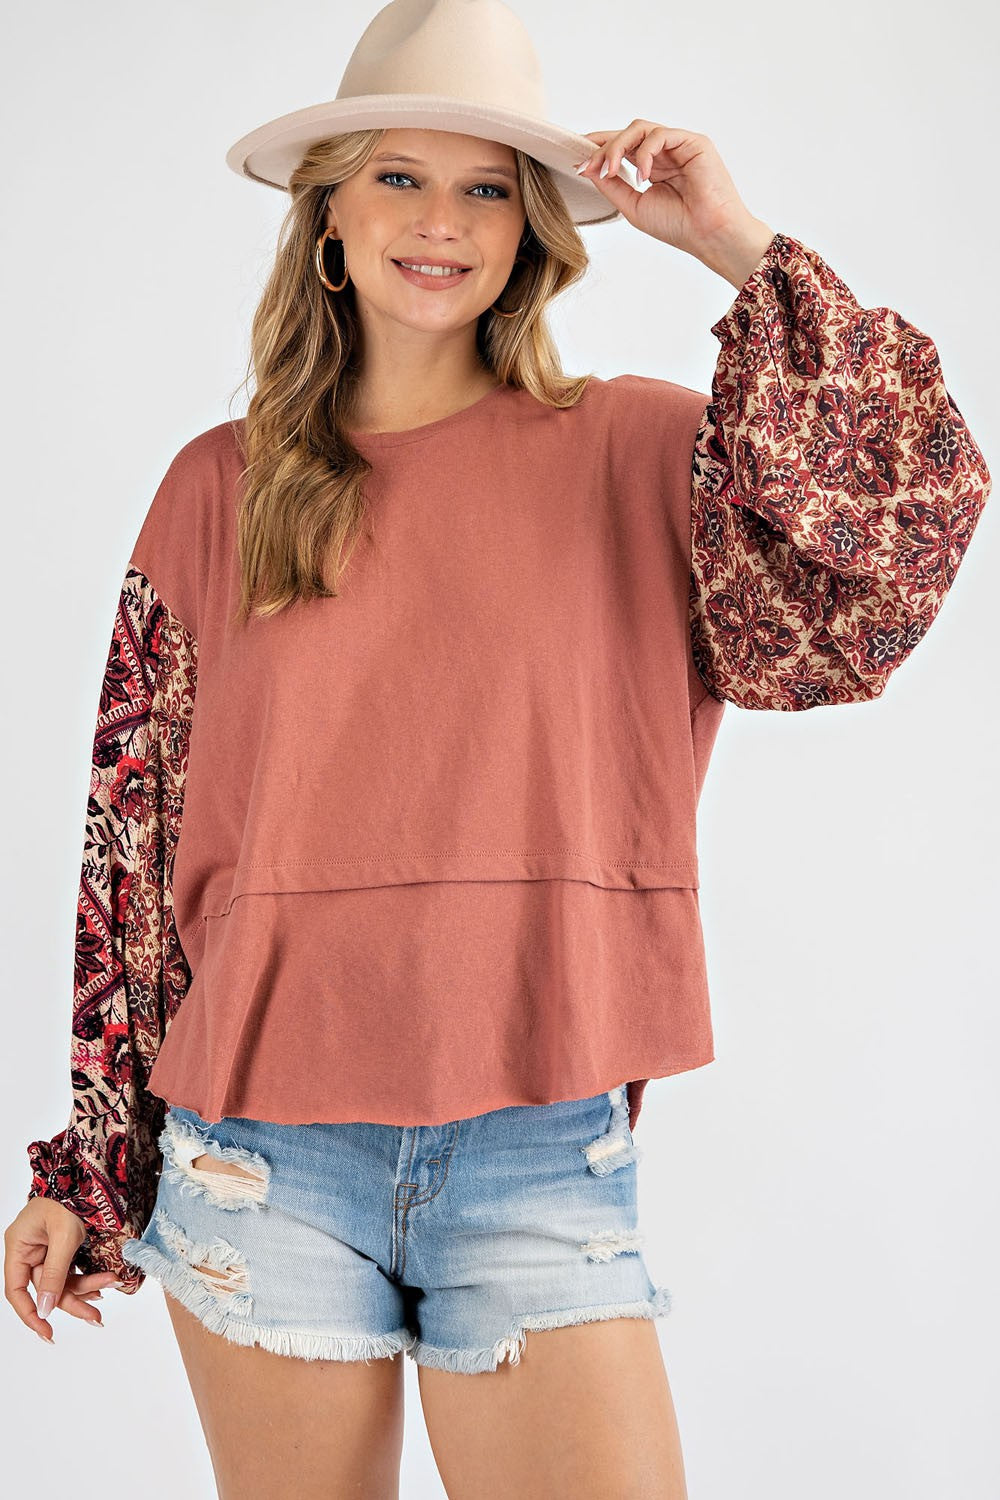 Easel Solid Color Top with Printed Sleeves in Pale Red Shirts & Tops Easel   